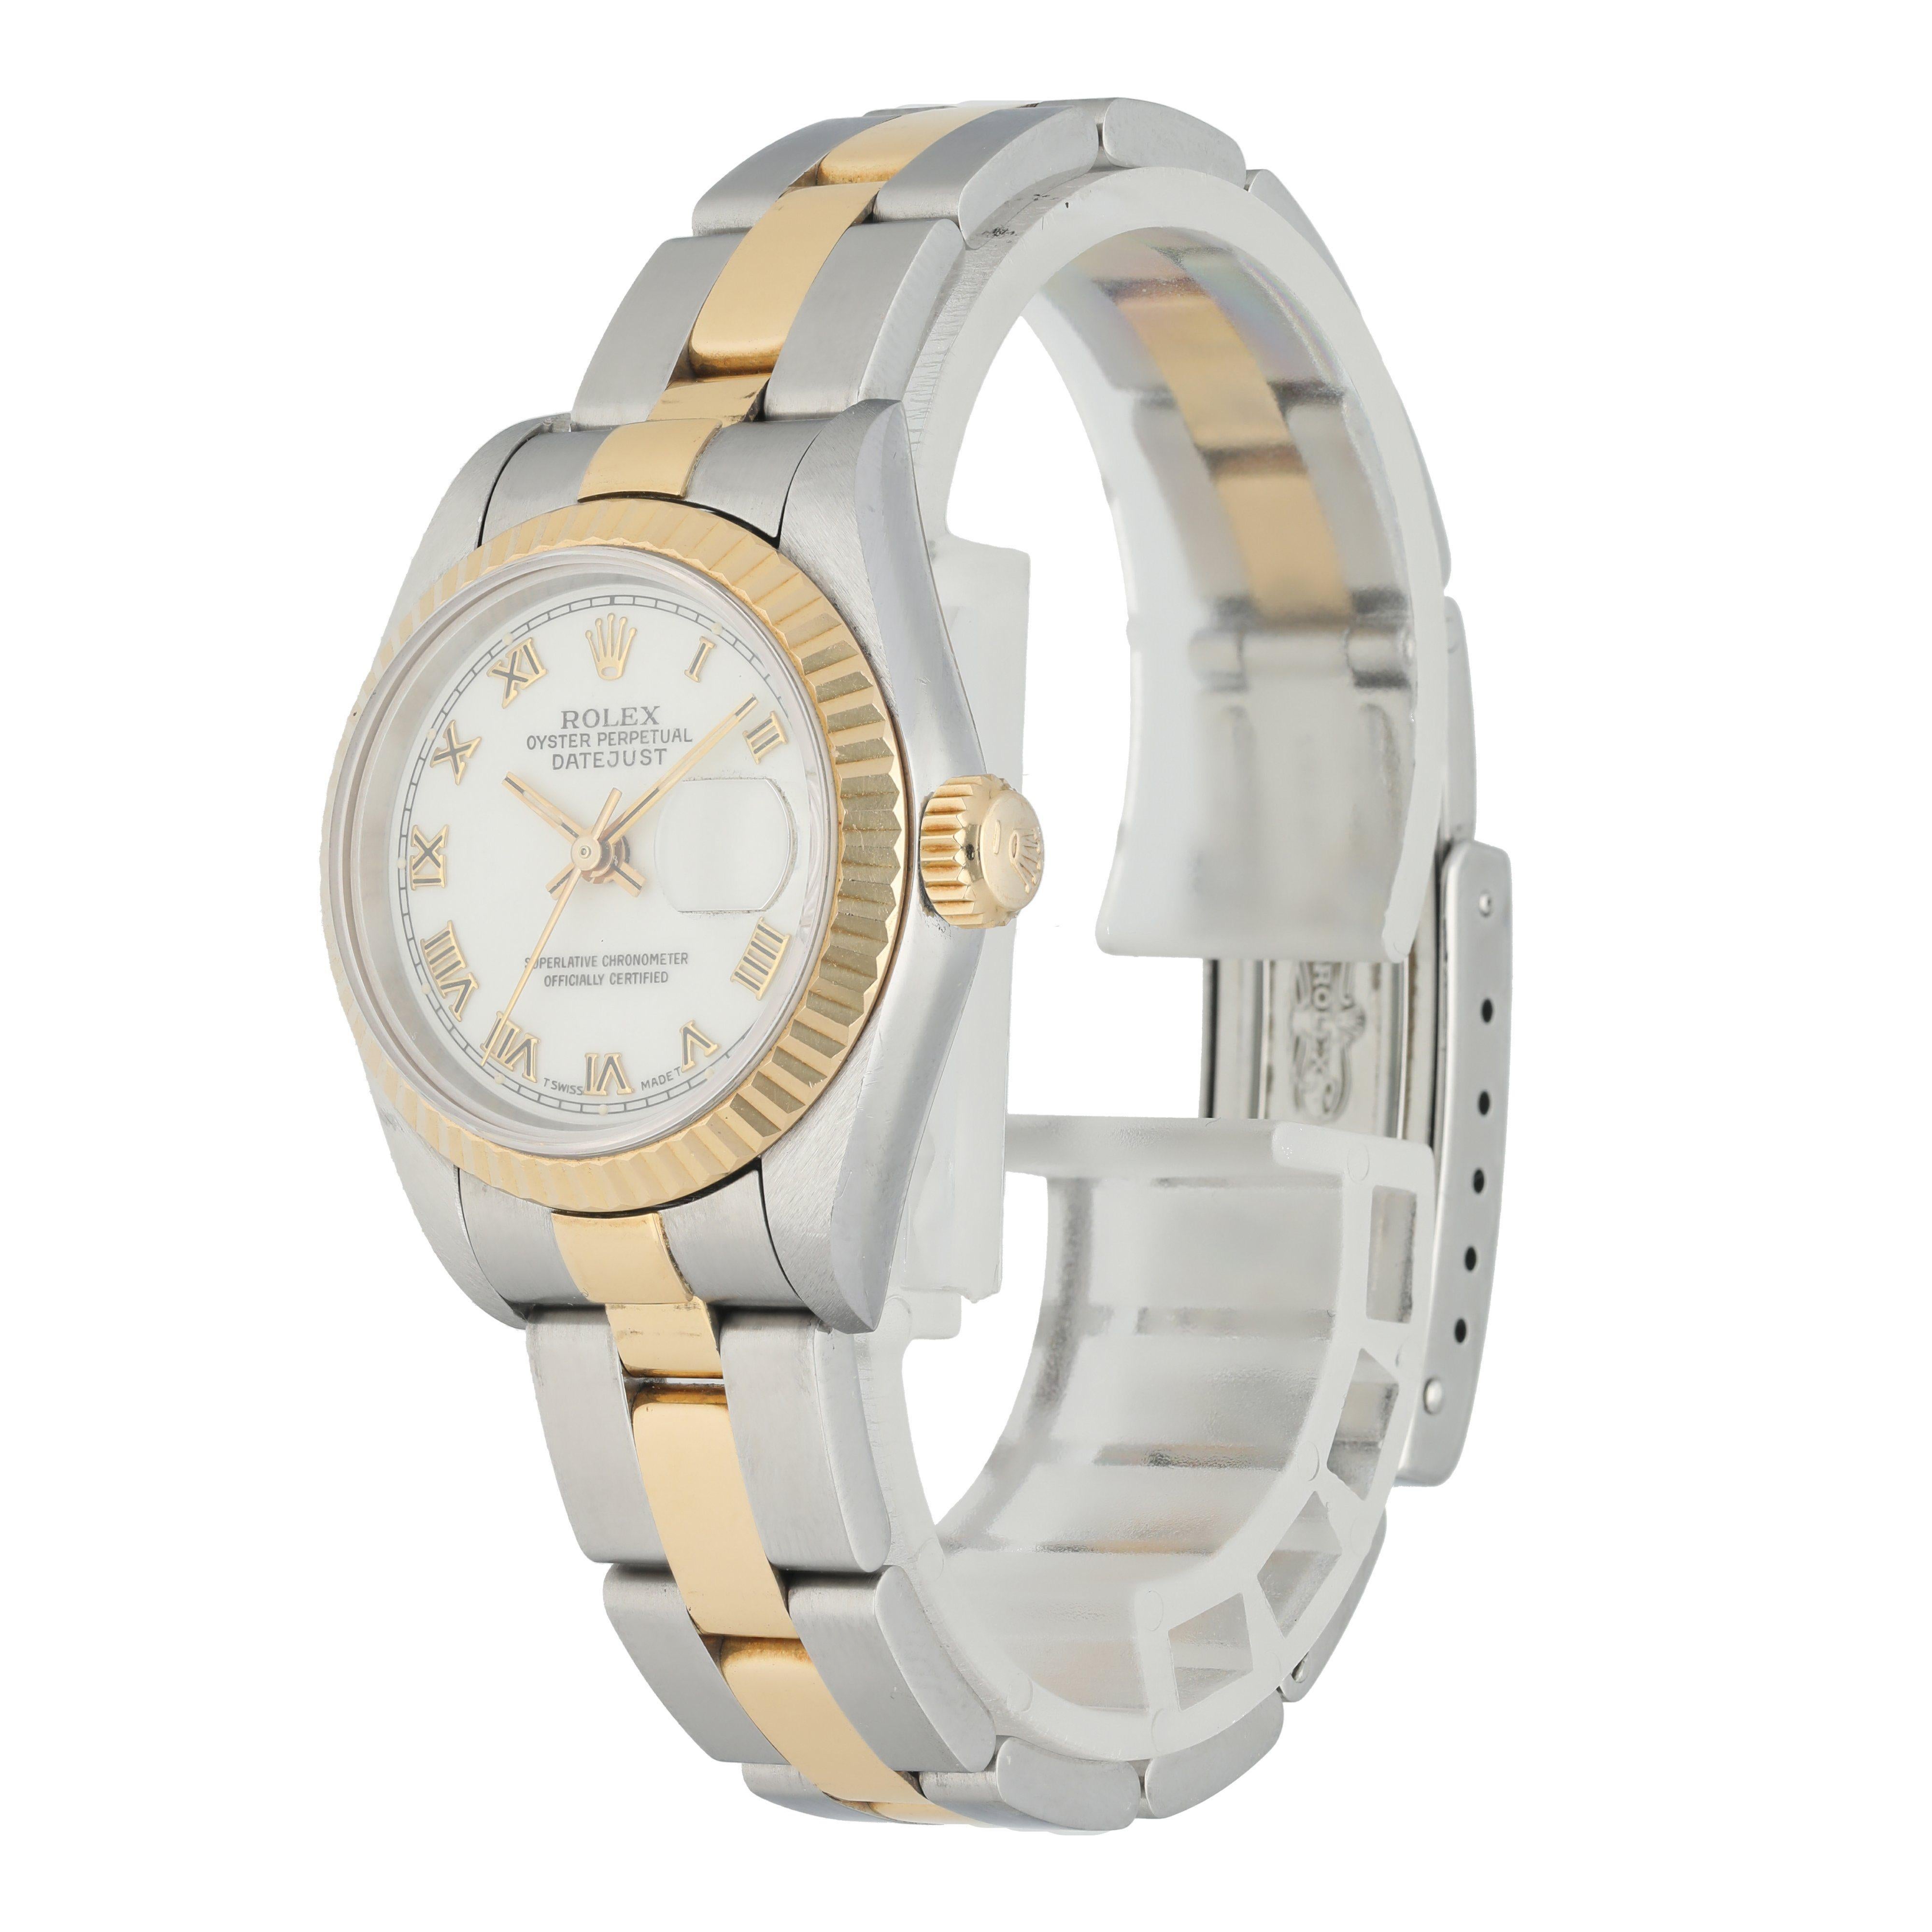 Rolex Datejust 69173 Ladies Watch. 
26mm Stainless Steel case. 
Yellow Gold fluted bezel. 
White dial with luminous gold hands and Roman numeral hour markers. 
Minute markers on the outer dial. 
Date display at the 3 o'clock position. 
Stainless